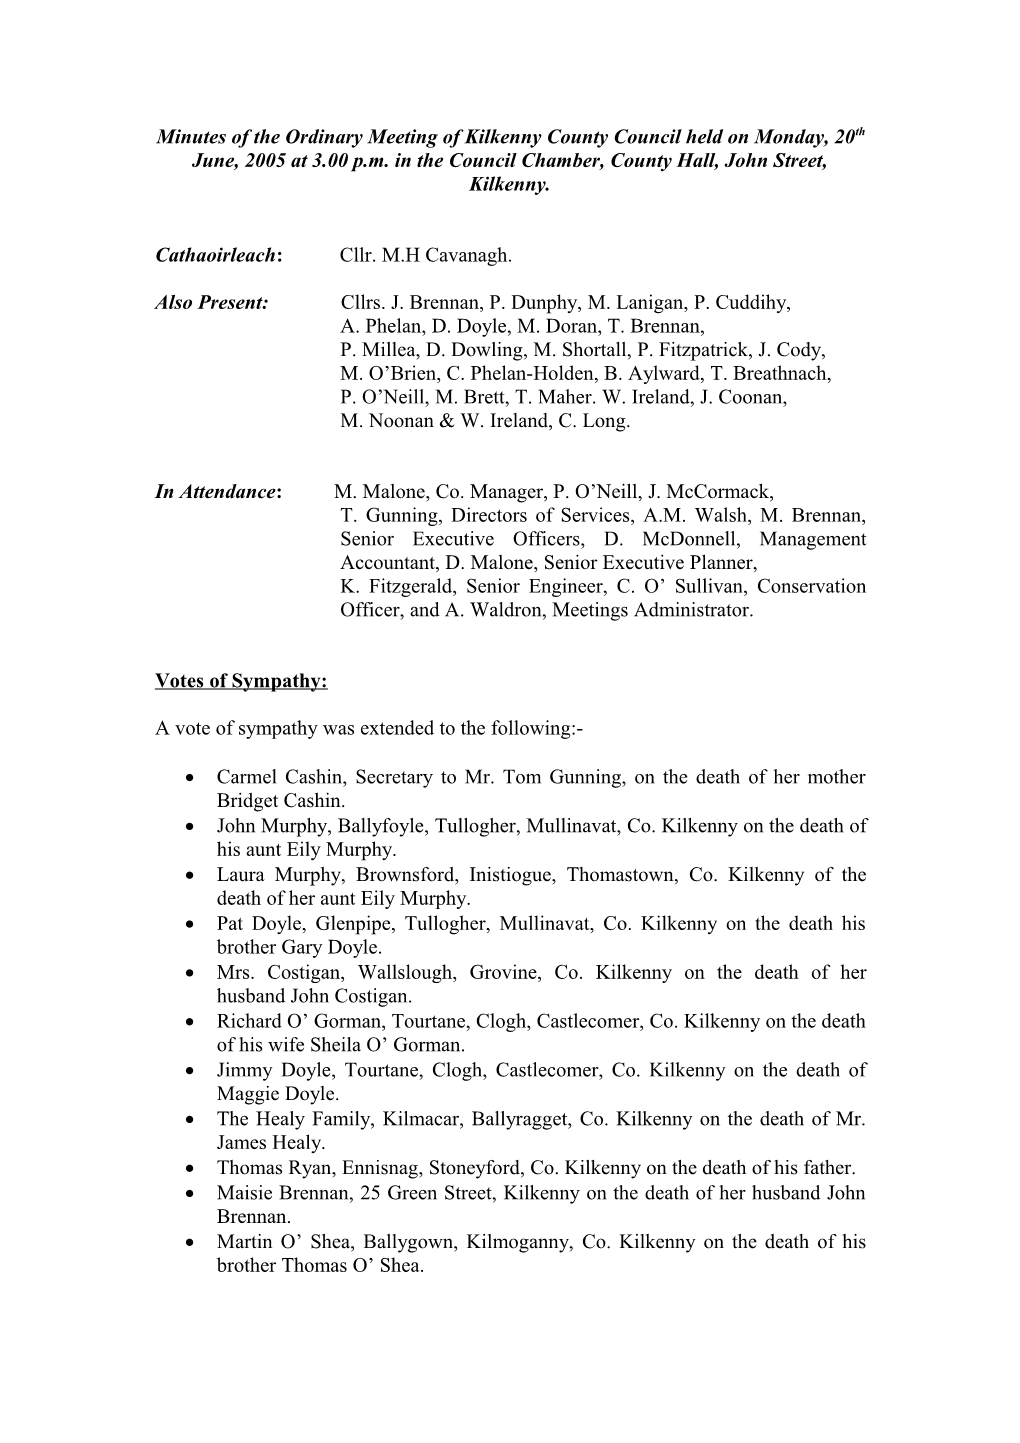 Minutes of the Ordinary Meeting of Kilkenny County Council Held on Monday, 20Th June, 2005 at 3